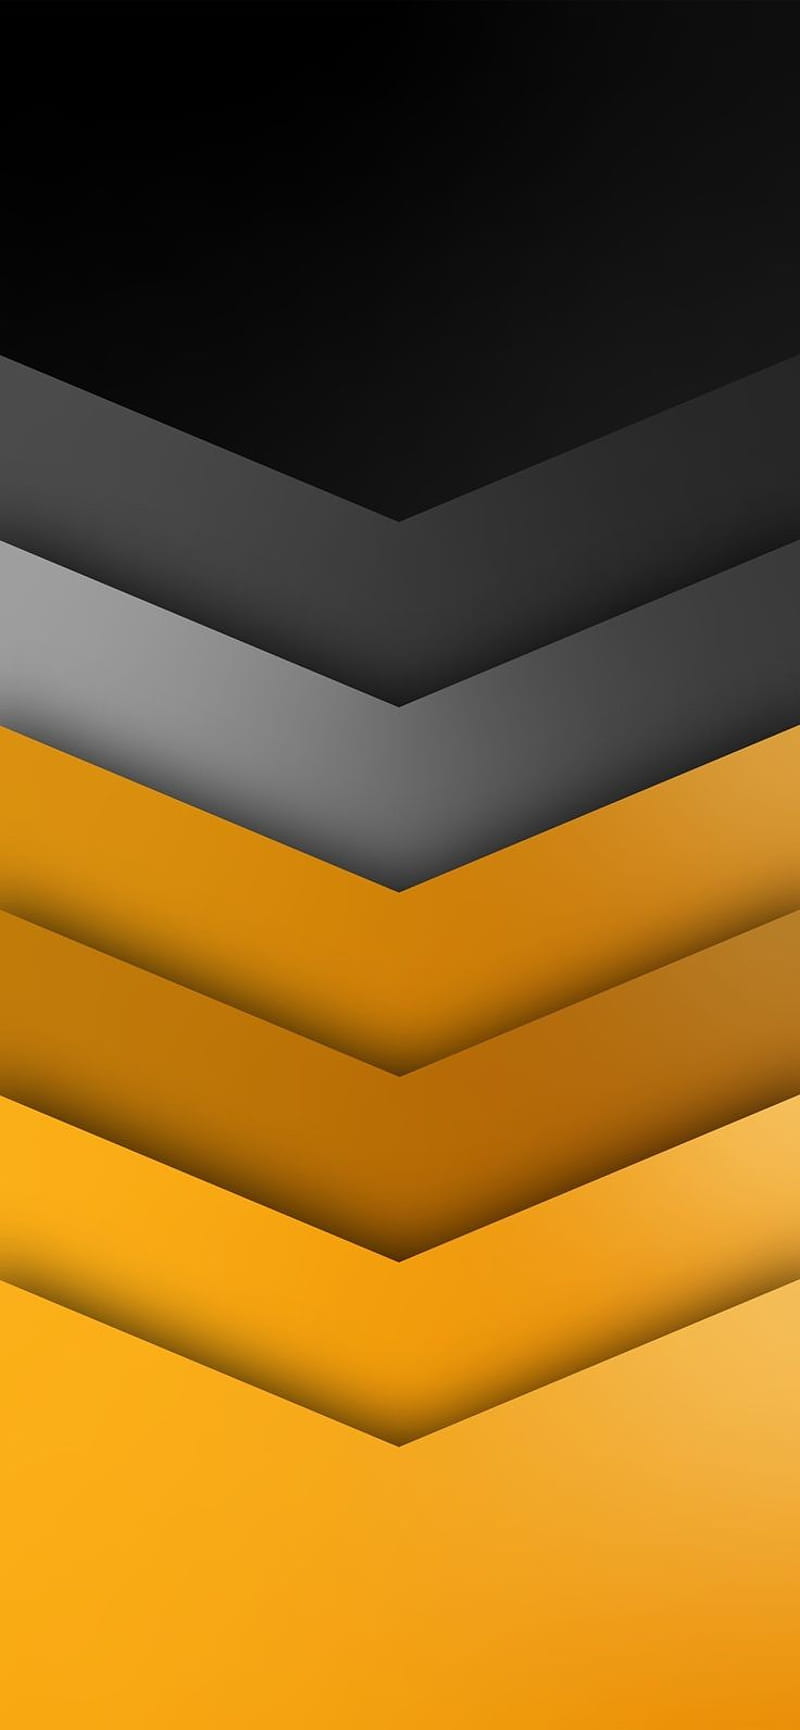 Details more than 68 wallpaper yellow and gray latest  incdgdbentre